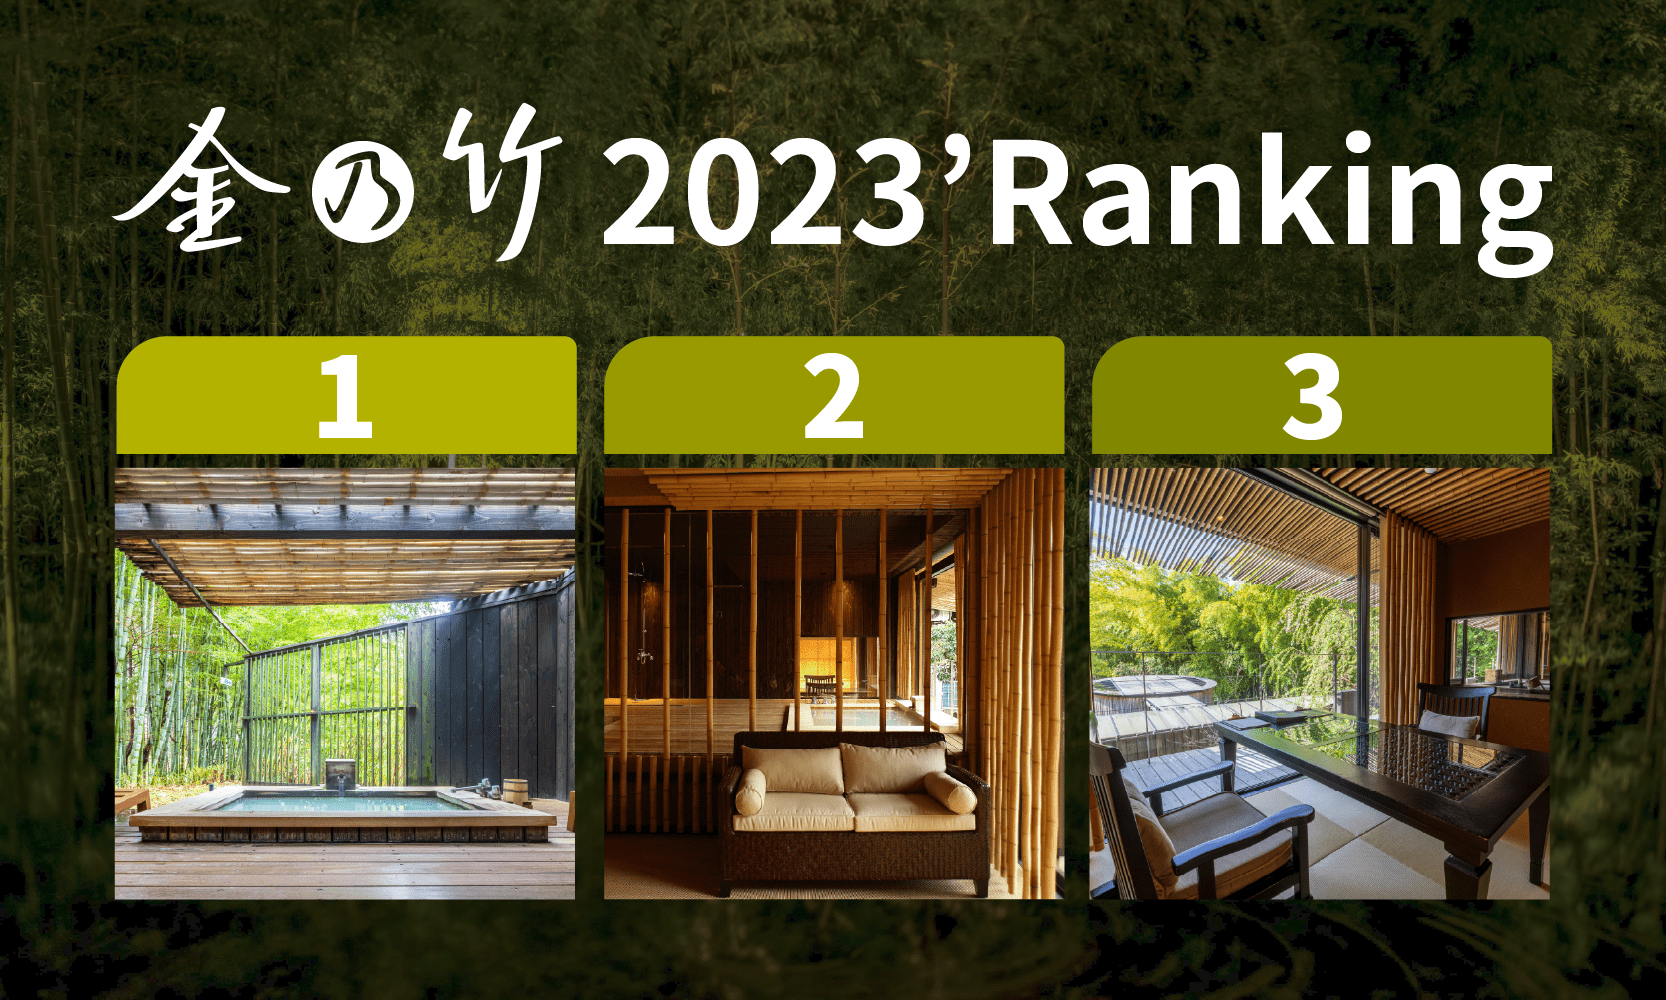 Announcement of the Top 10 Room Rankings Popular in the "Stay-at-Home Demand" in 2023